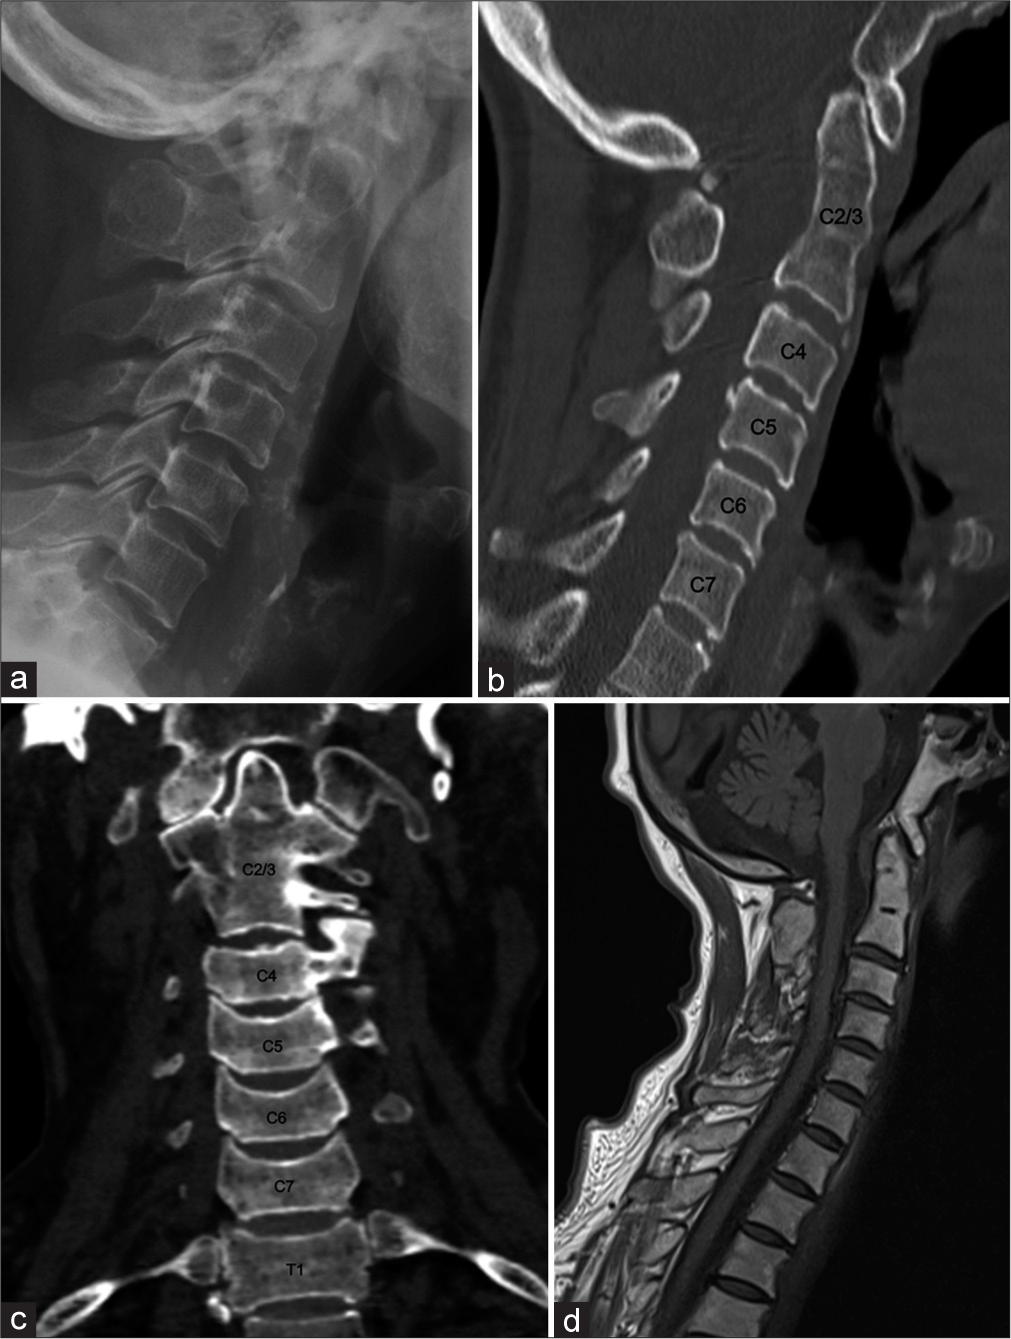 (a) Plain radiograph of the cervical spine showing anterior arch assimilation. Associated fusion of C2 and C3 vertebral bodies and posterior elements were noted. The atlantodental interval is within normal limits. No basilar invagination was seen. (b) Annotated computed tomography (CT) of the cervical spine, confirming the findings on plain radiograph. Notice the relatively ‘elongated’ appearance of the dens, supporting the diagnosis of C2/3 fusion. (c) Coronal reformatted CT of the cervical spine showing C2/3 fusion. The first rib-bearing thoracic vertebral body is labeled as T1. (d) T1W magnetic resonance imaging of the cervical spine, confirming previous findings. The cervical cord is not compressed.